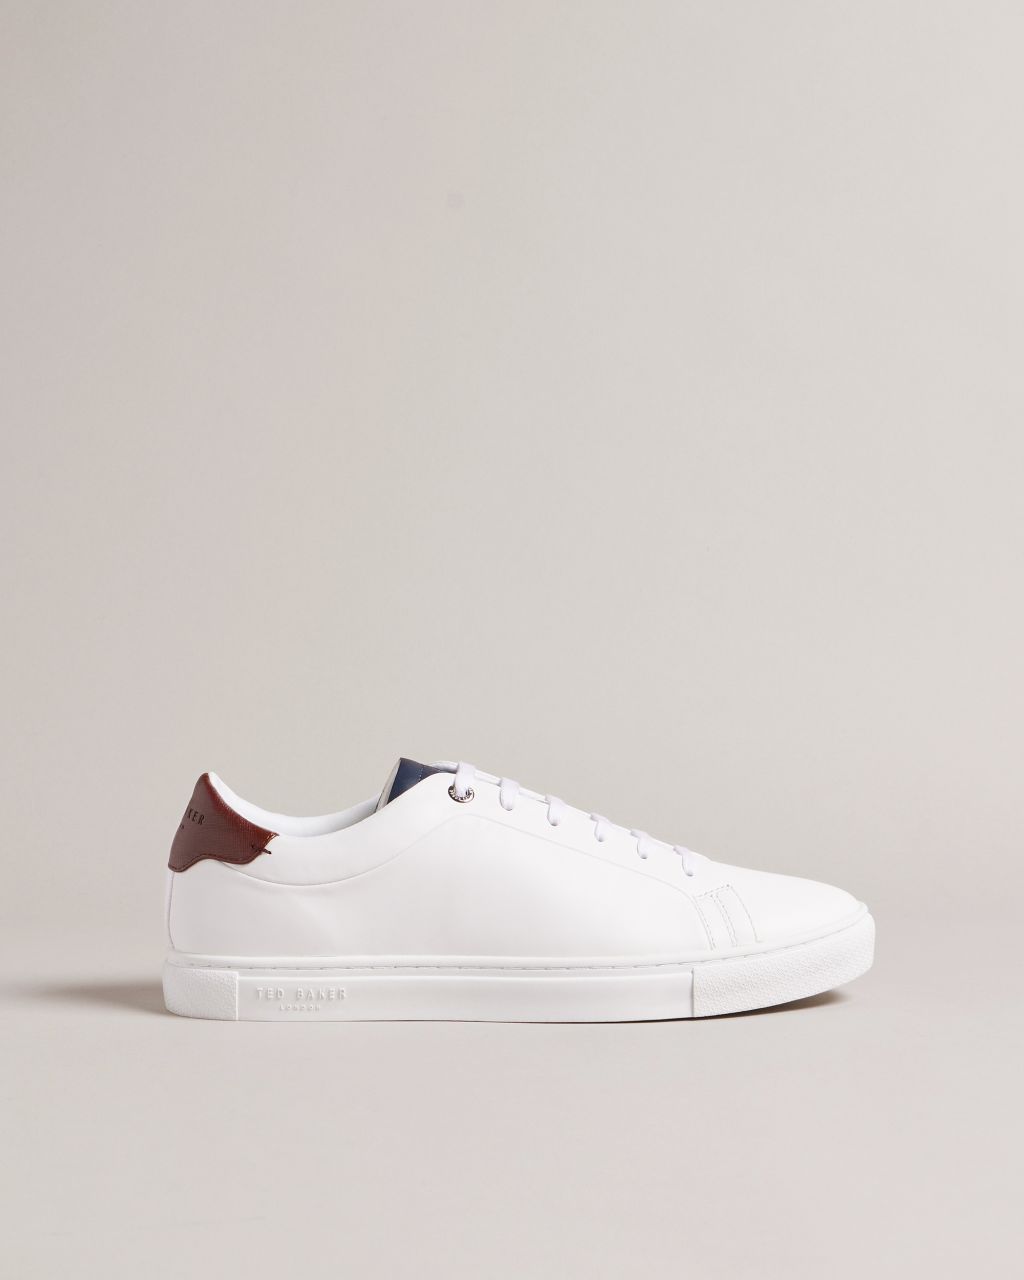 Ted Baker Men's Simple Lace Up Sneaker in White-Red, Triloba, Leather